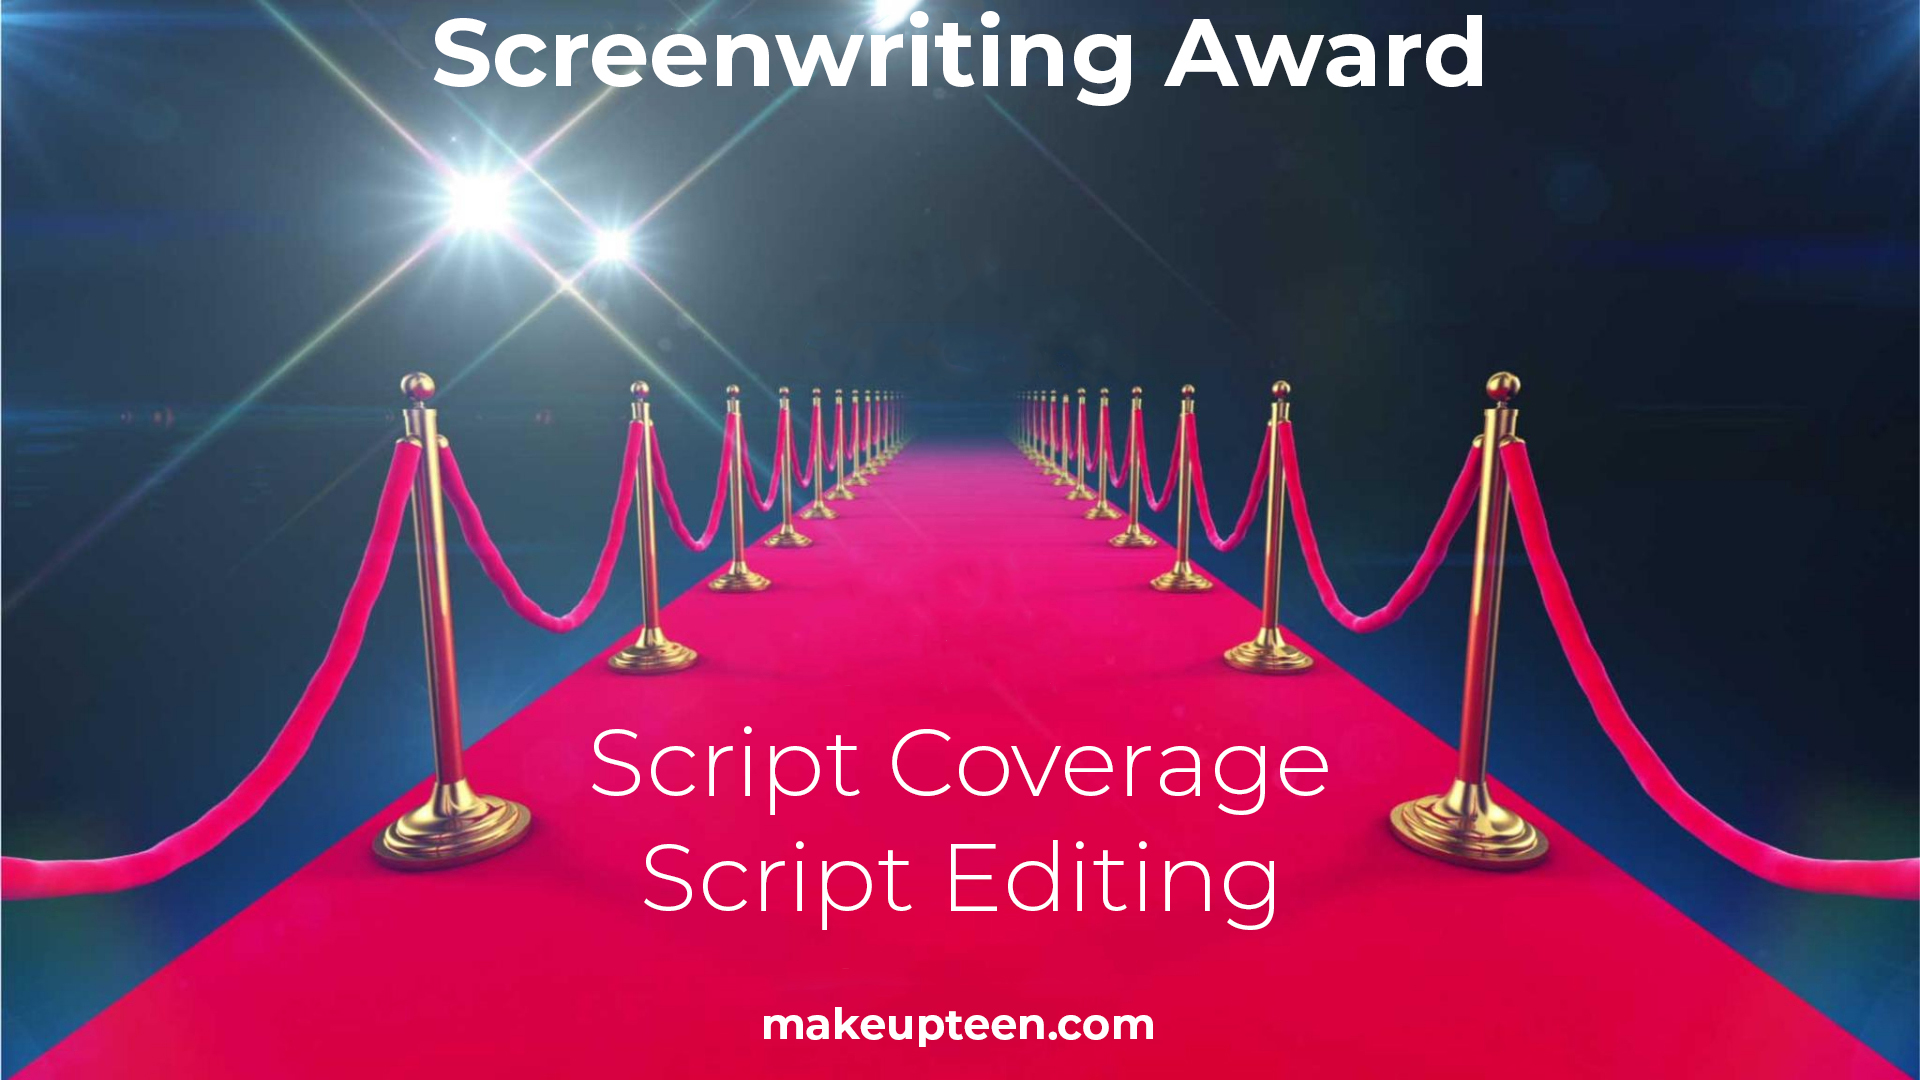 Script Coverage And Script Editing prize From Page Turner Awards 2022